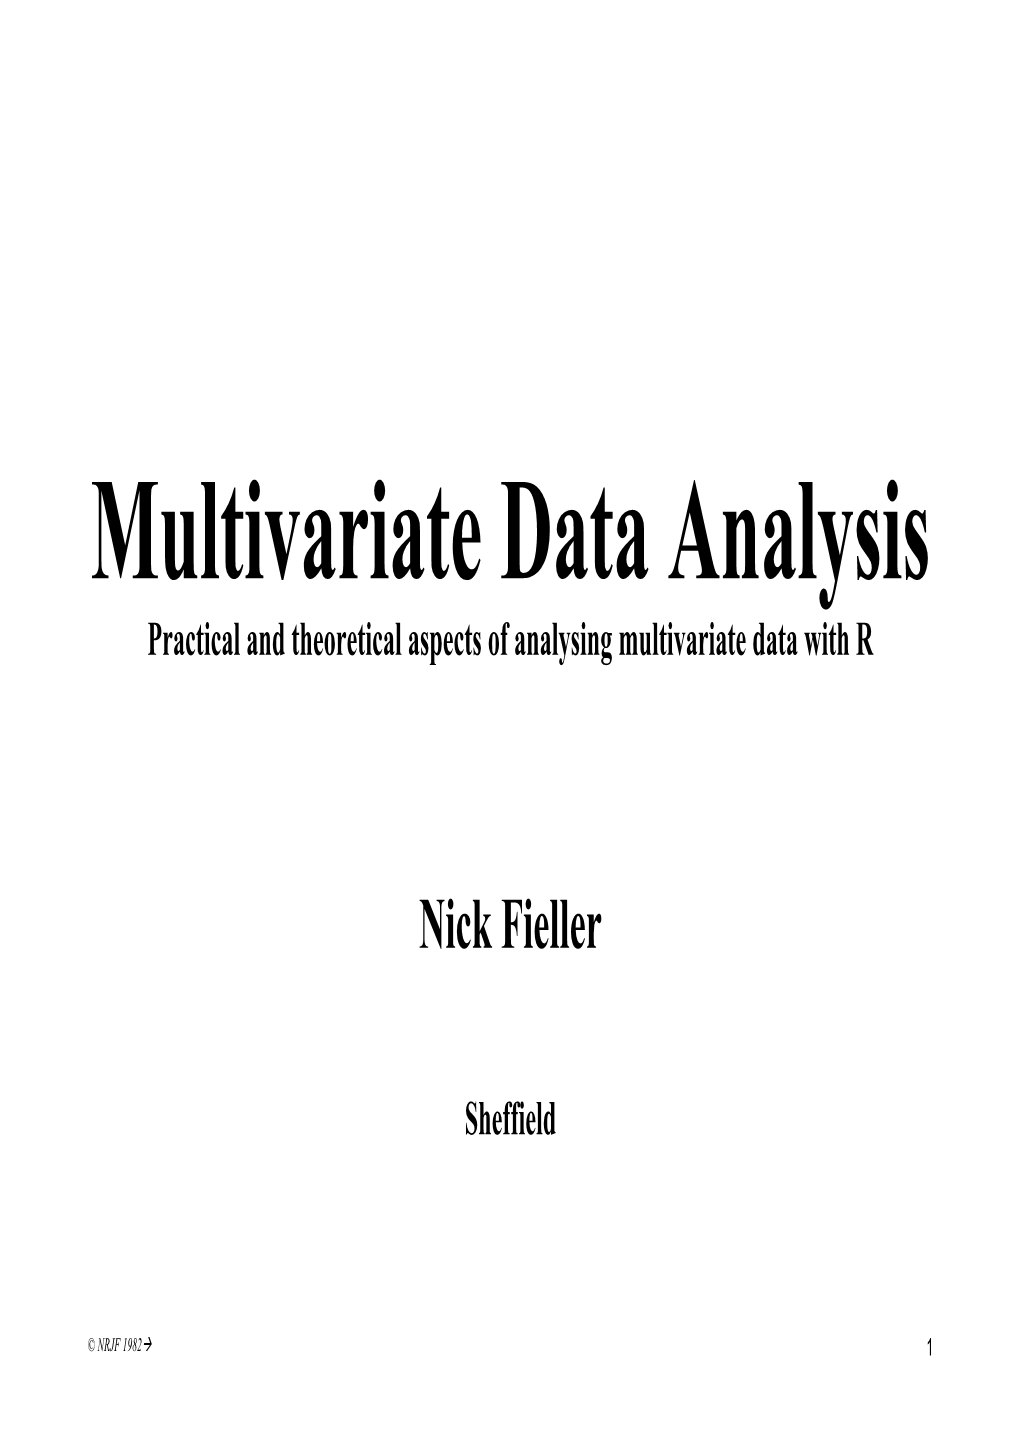 Multivariate Data Analysis Practical and Theoretical Aspects of Analysing Multivariate Data with R